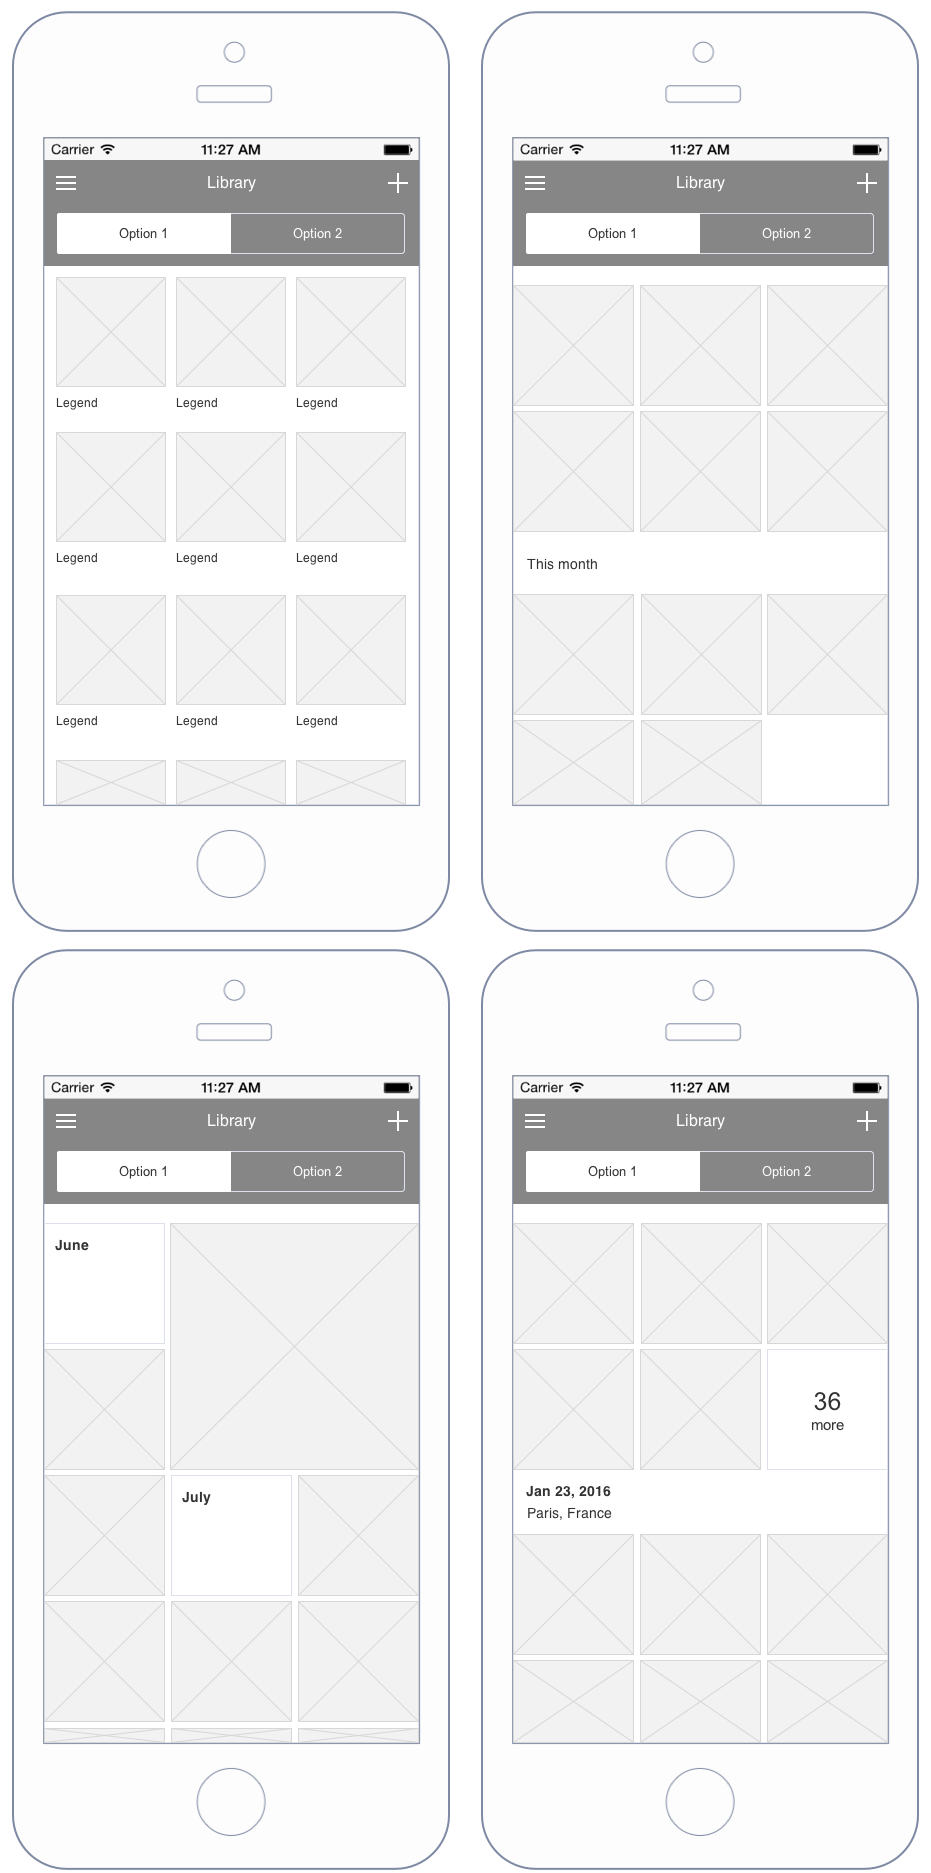 Totalwireframe 原型素材系列之 iPhone Apps Library [for Axure]插图(12)